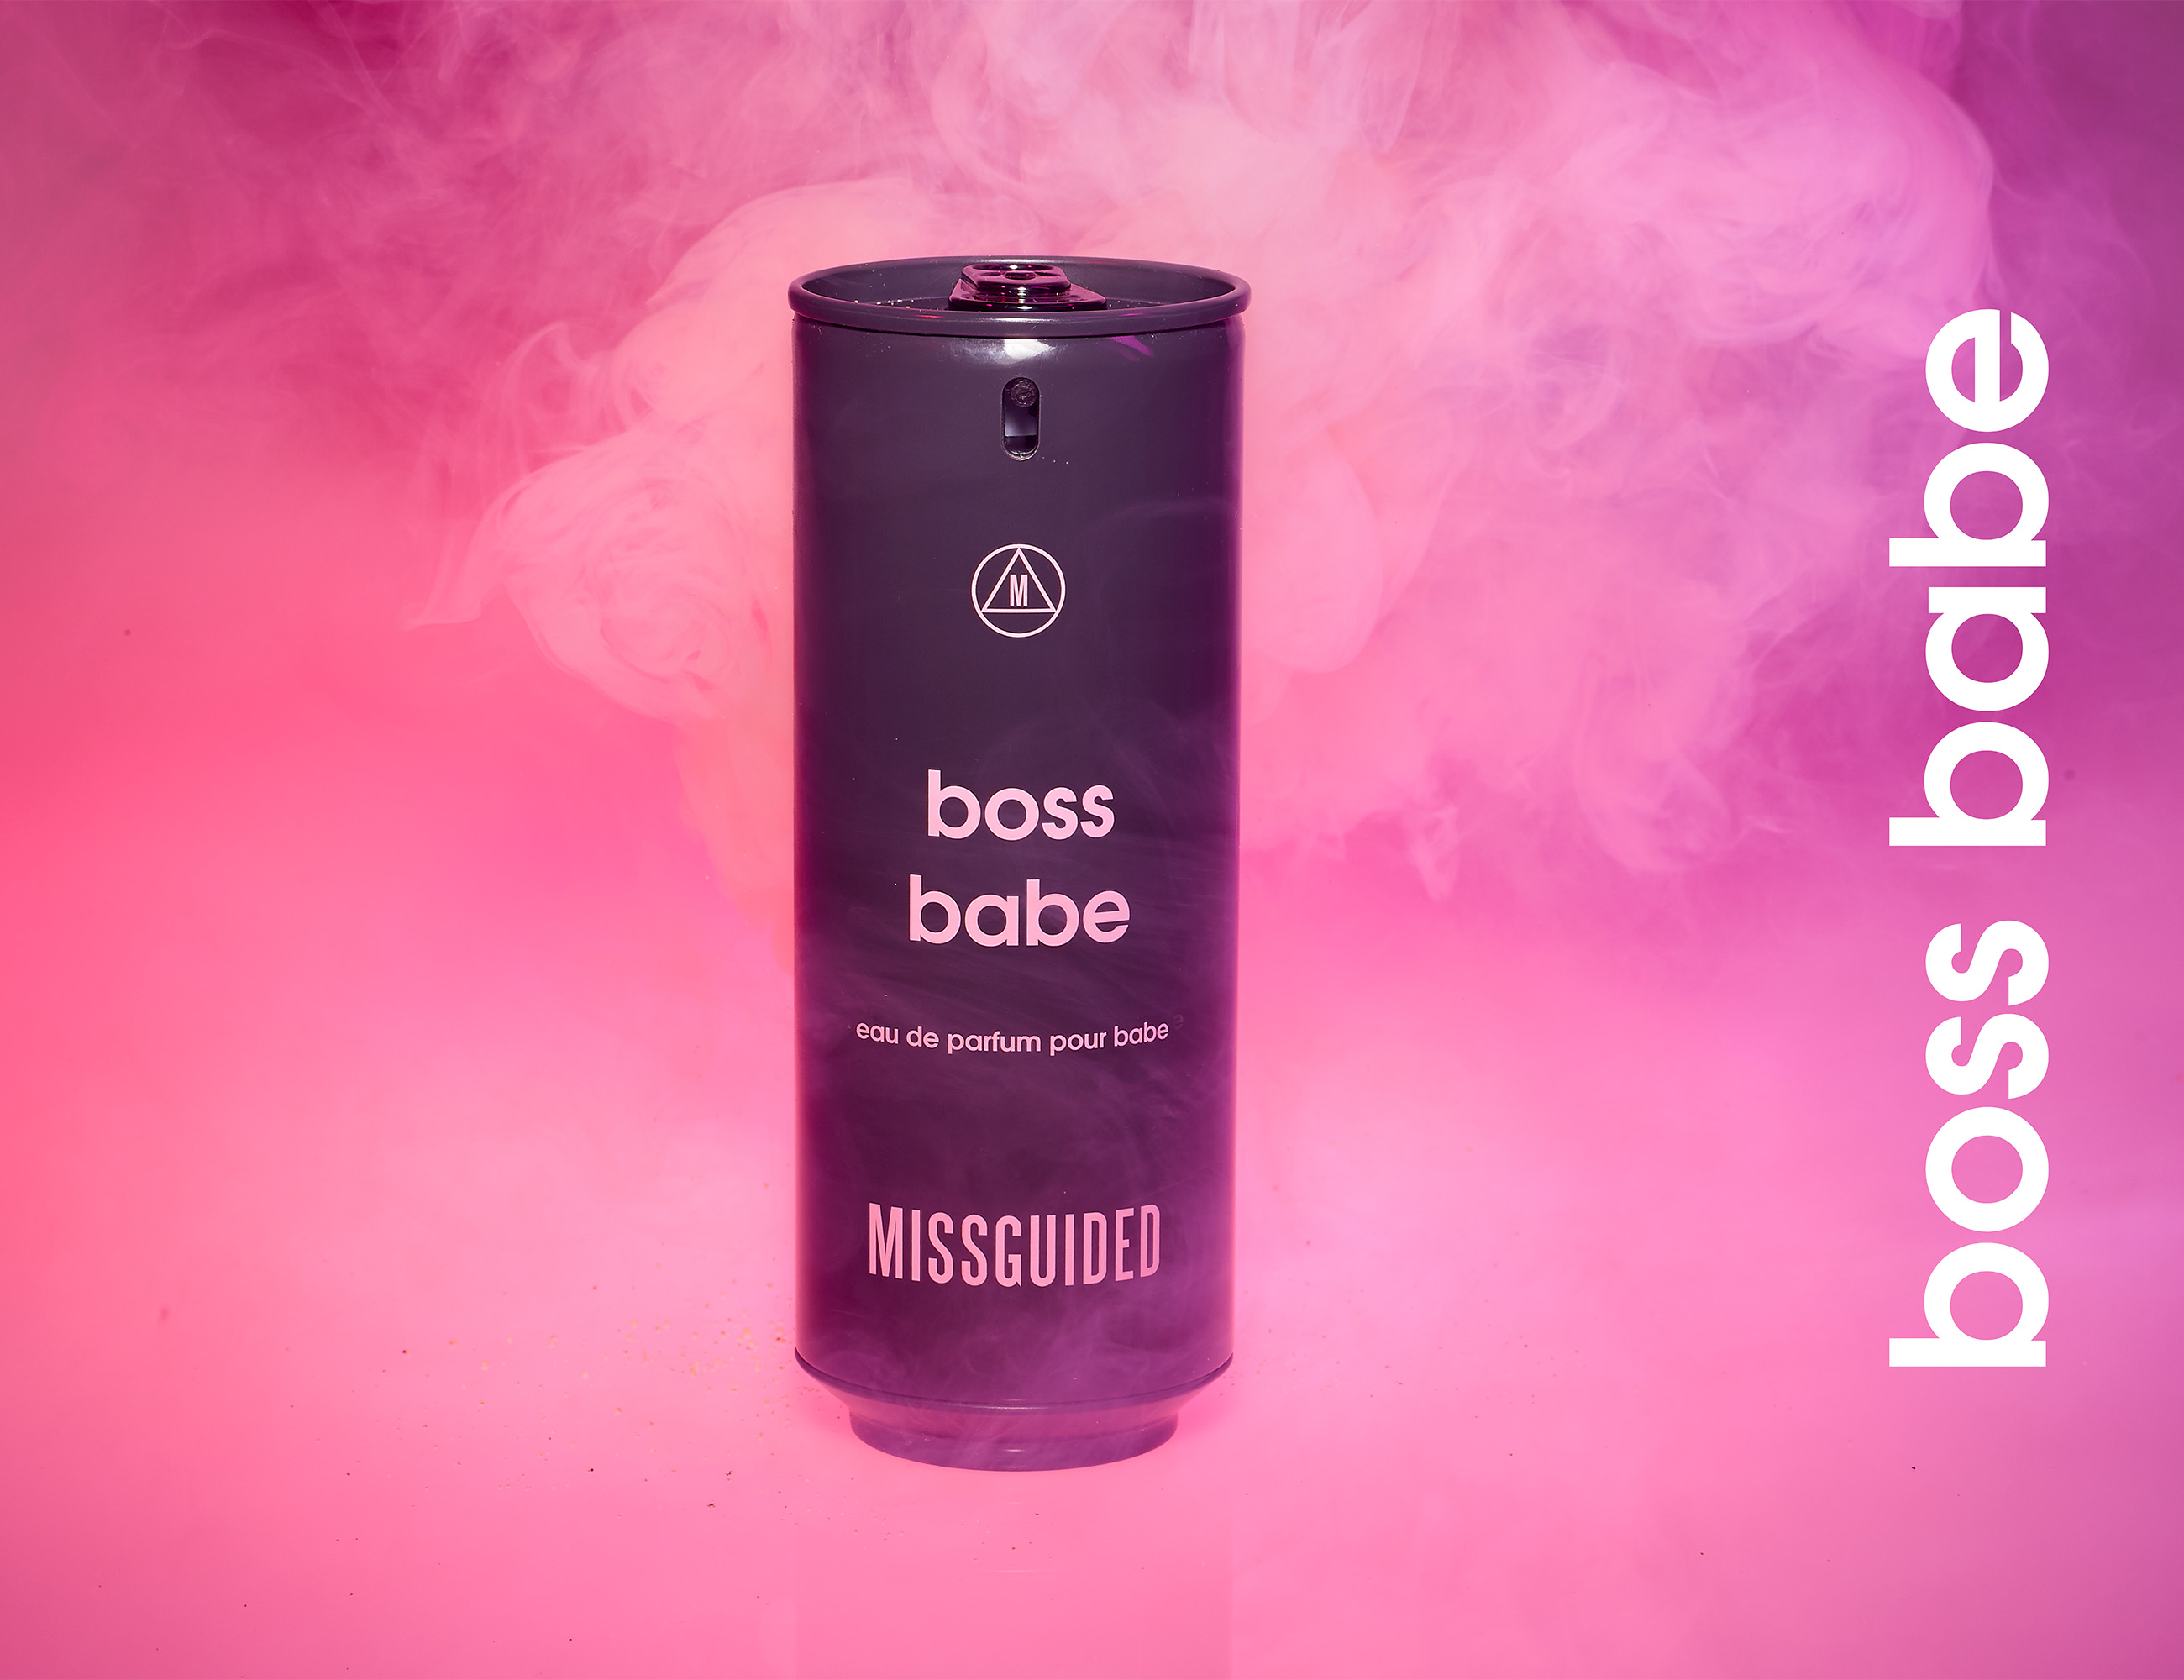 Boss Babe Missguided perfume - a 